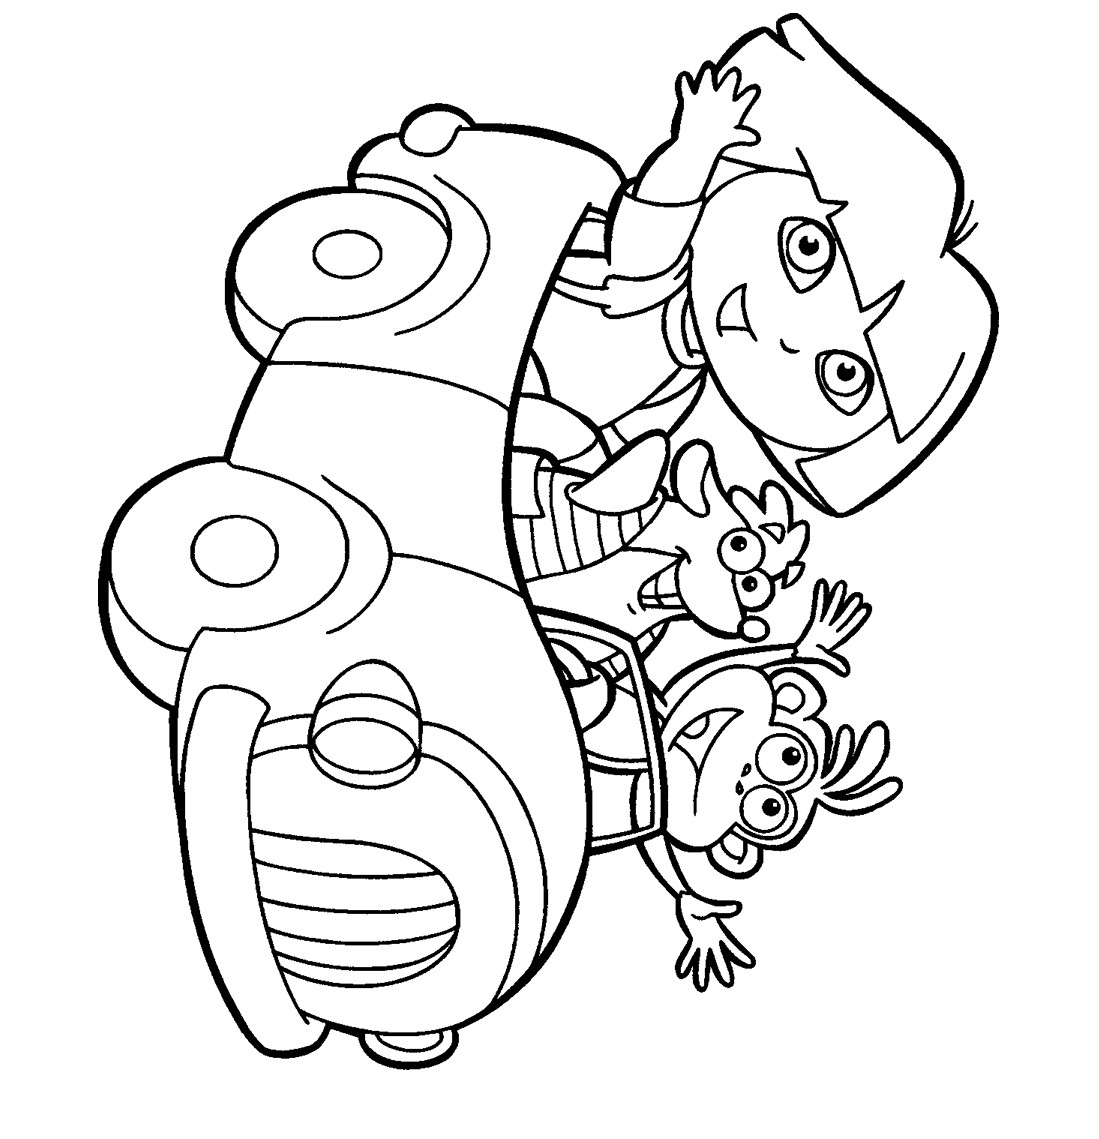 Coloring Pages For Children
 Printable coloring pages for kids